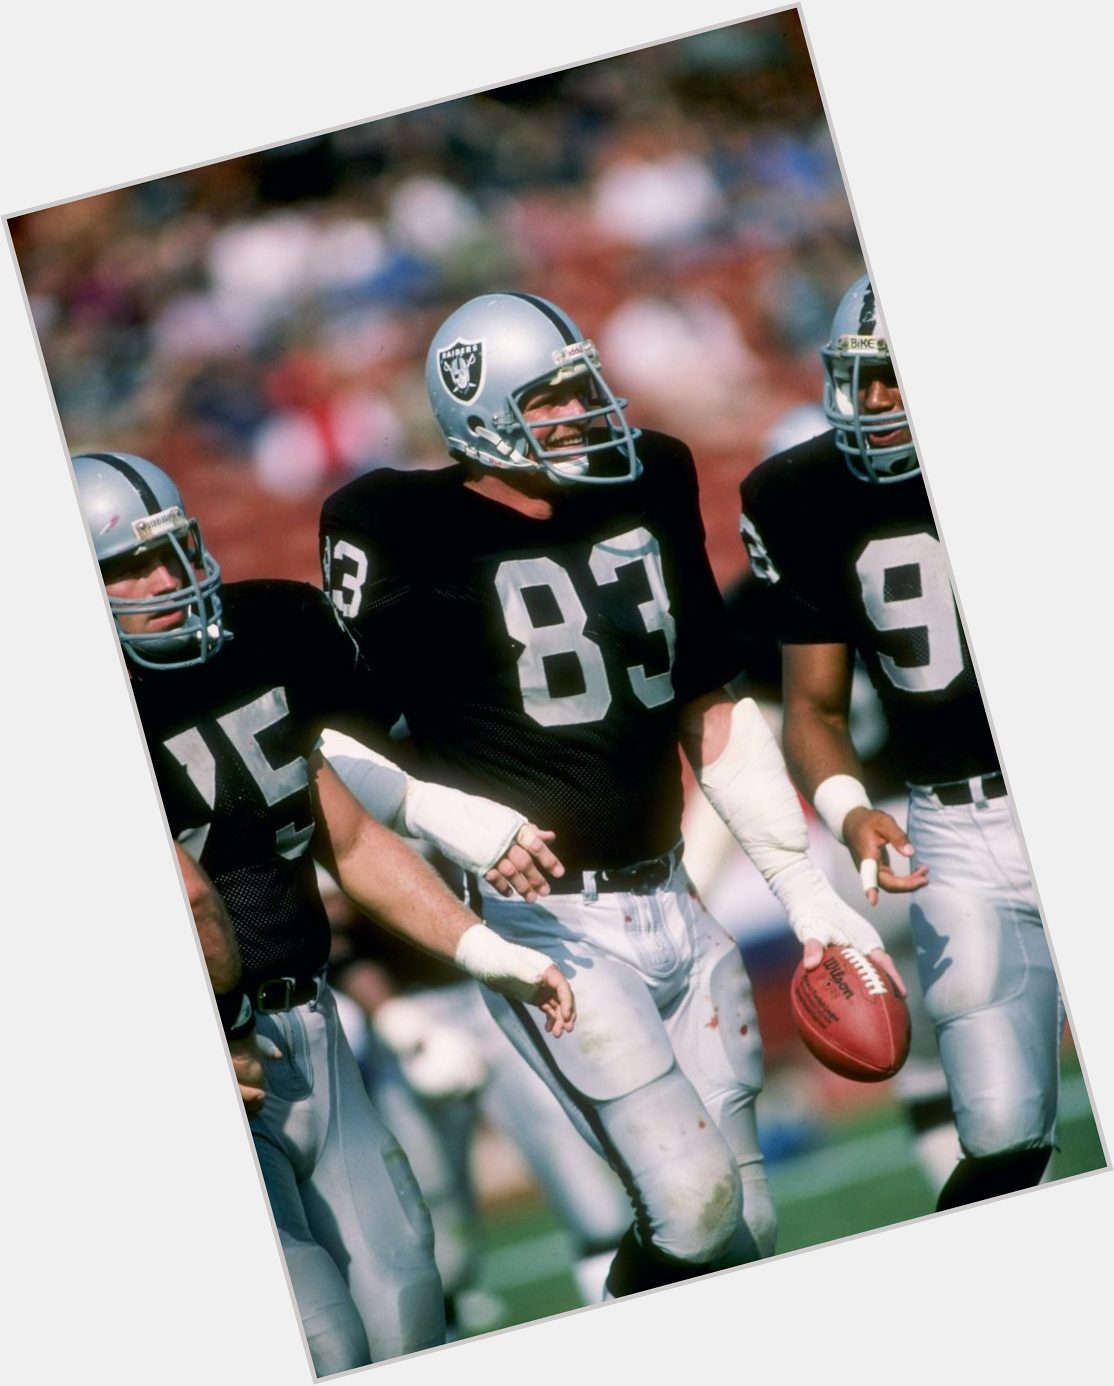 Happy Birthday to Raiders legend and NFL Hall of Fame LB Ted Hendricks 